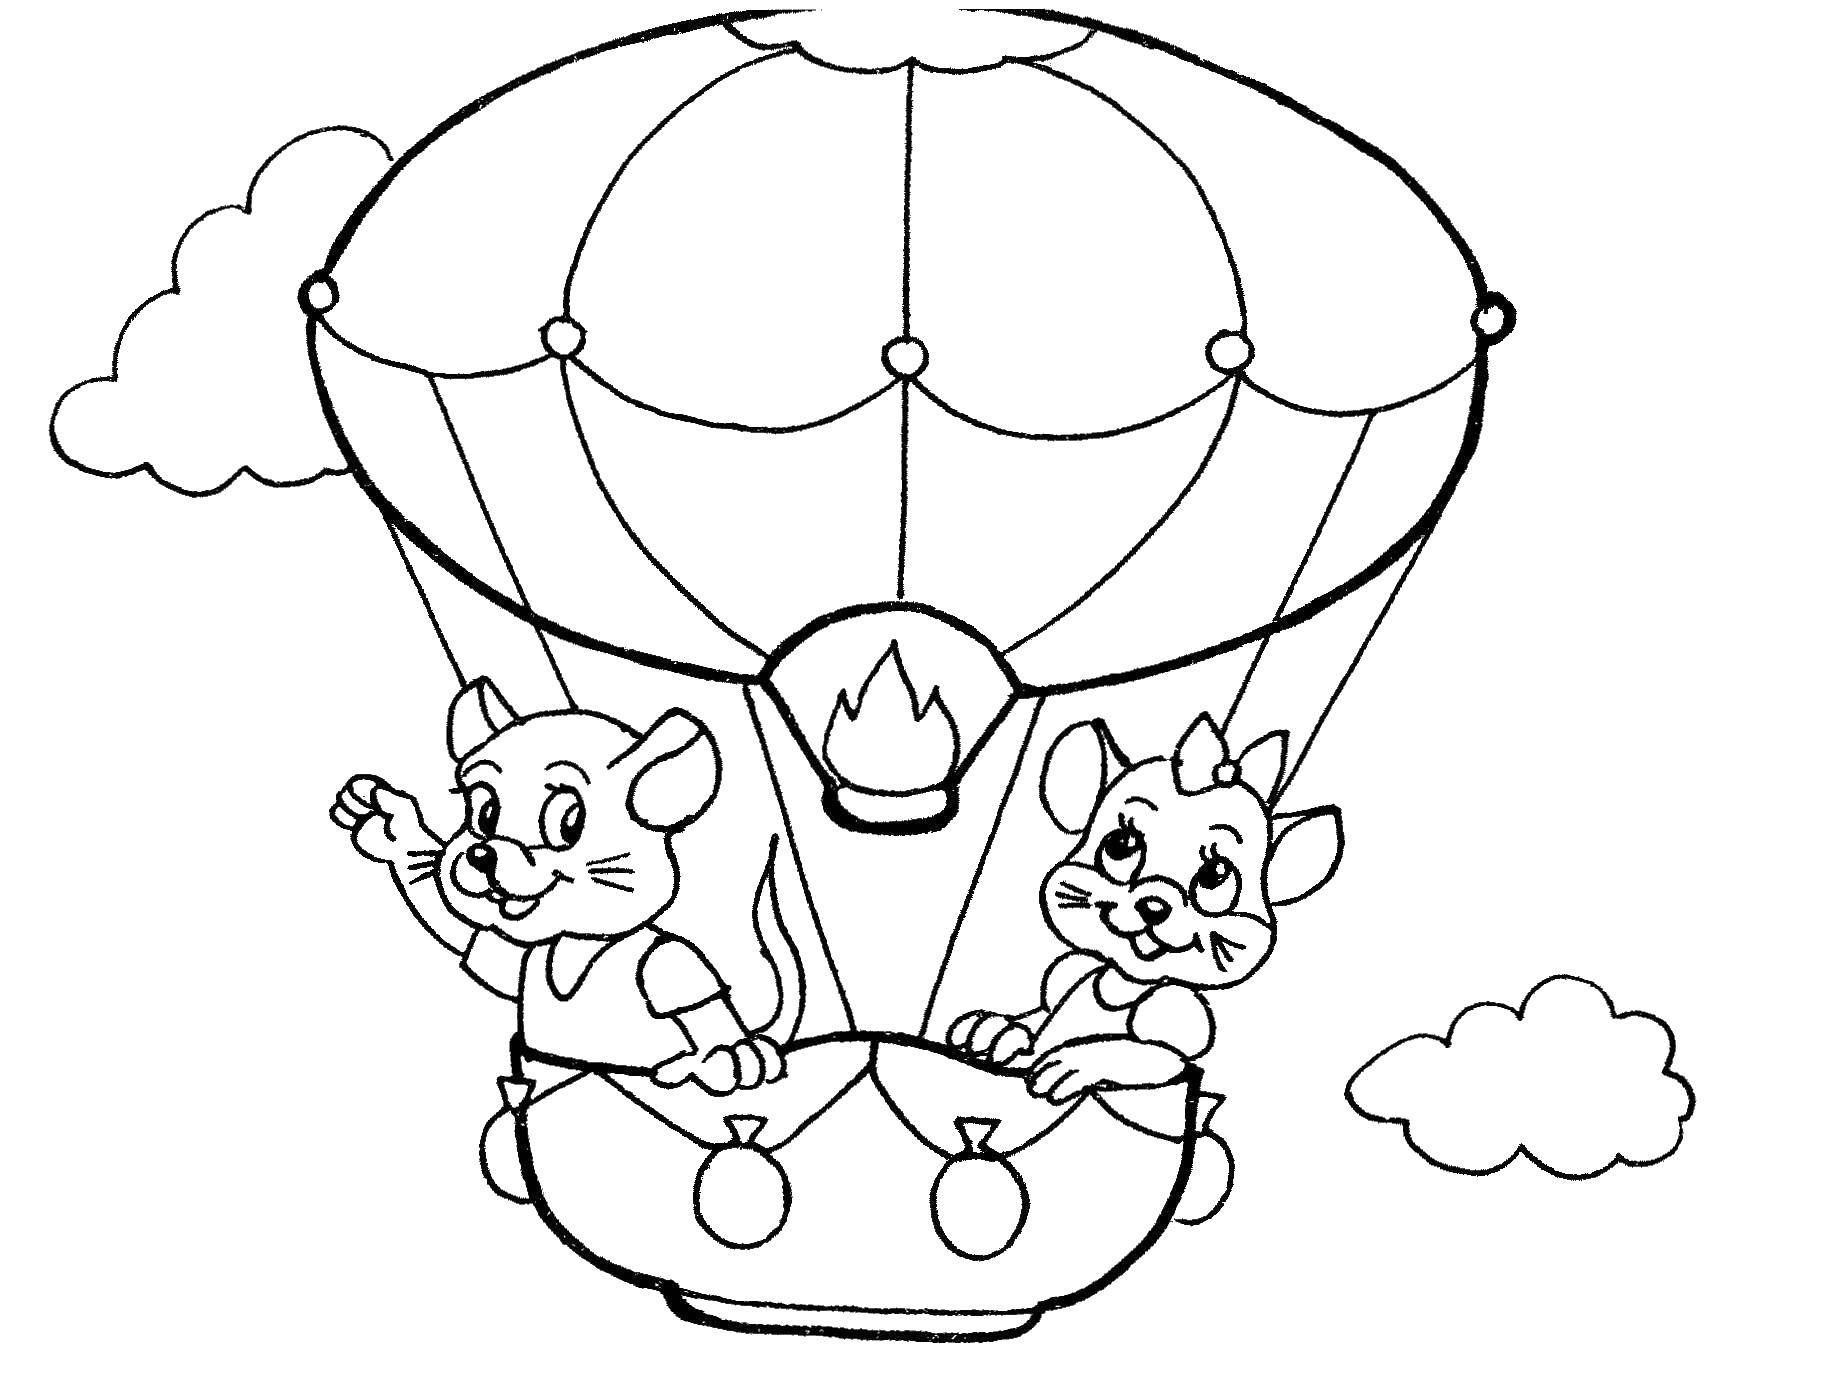 Coloring Mouse riding in a hot air balloon. Category aircraft. Tags:  balloon, mouse.